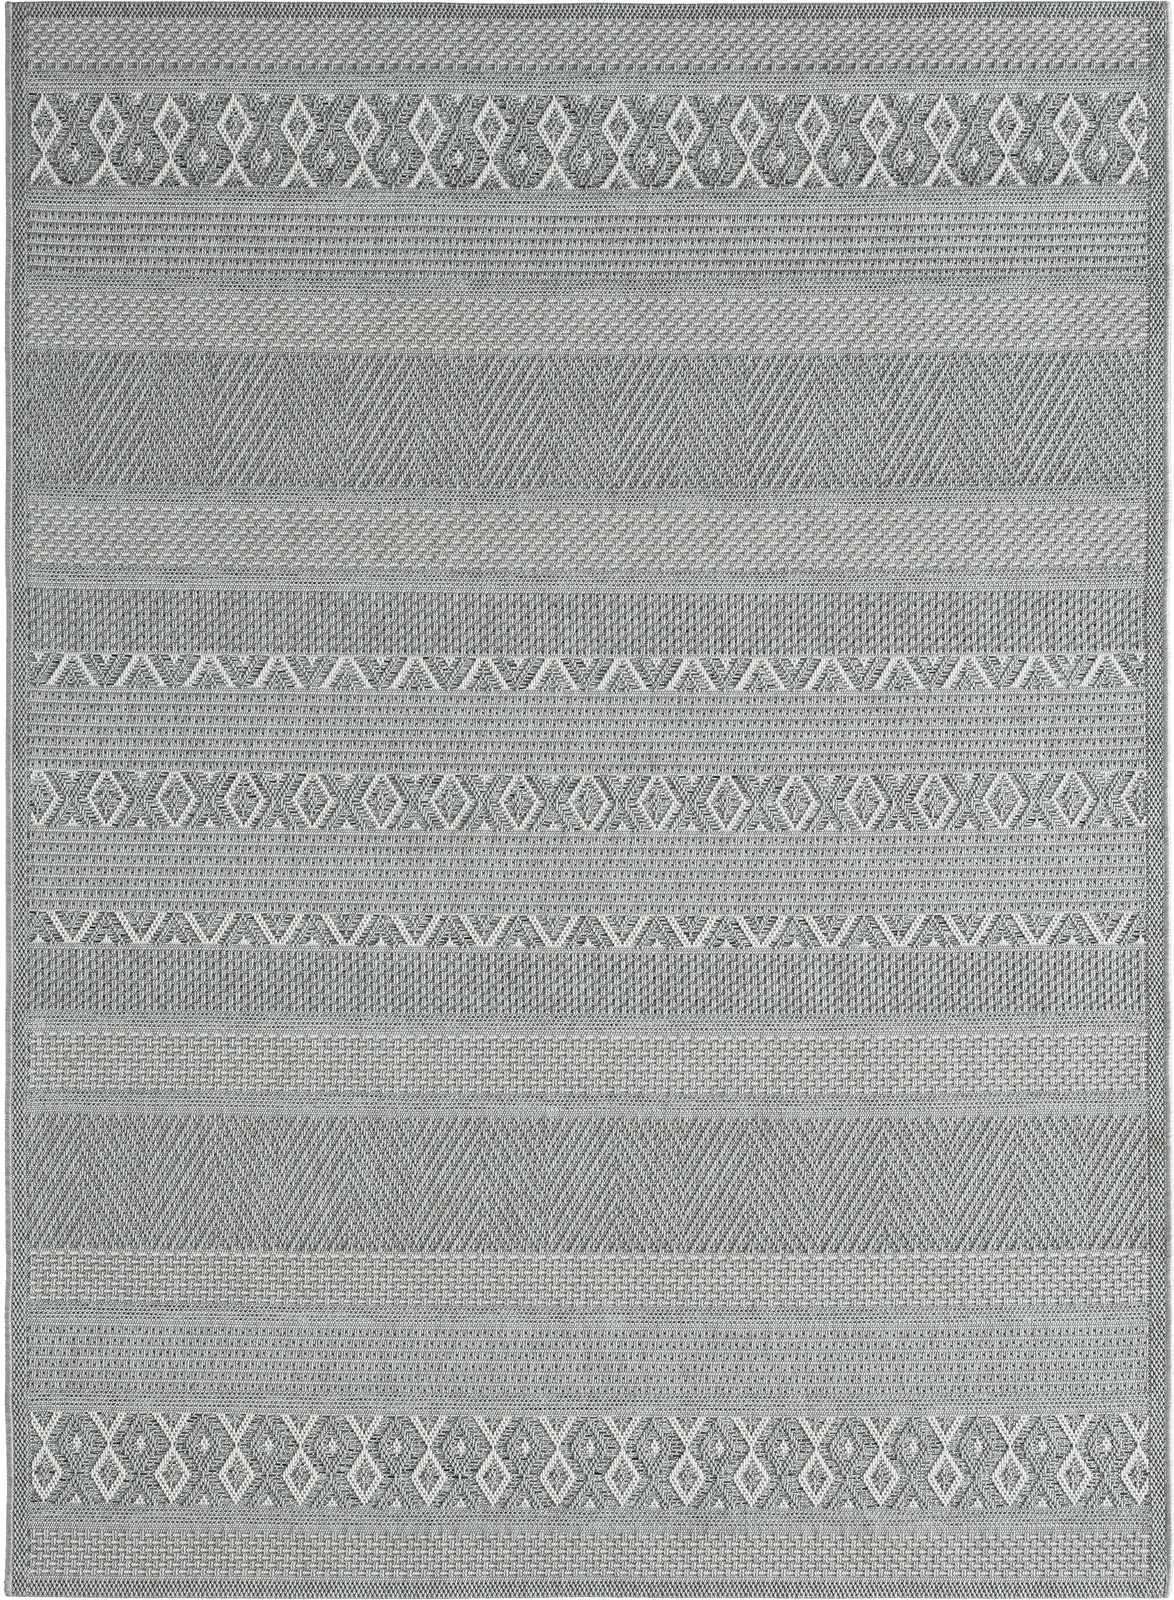             Simple Patterned Outdoor Rug in Grey - 280 x 200 cm
        